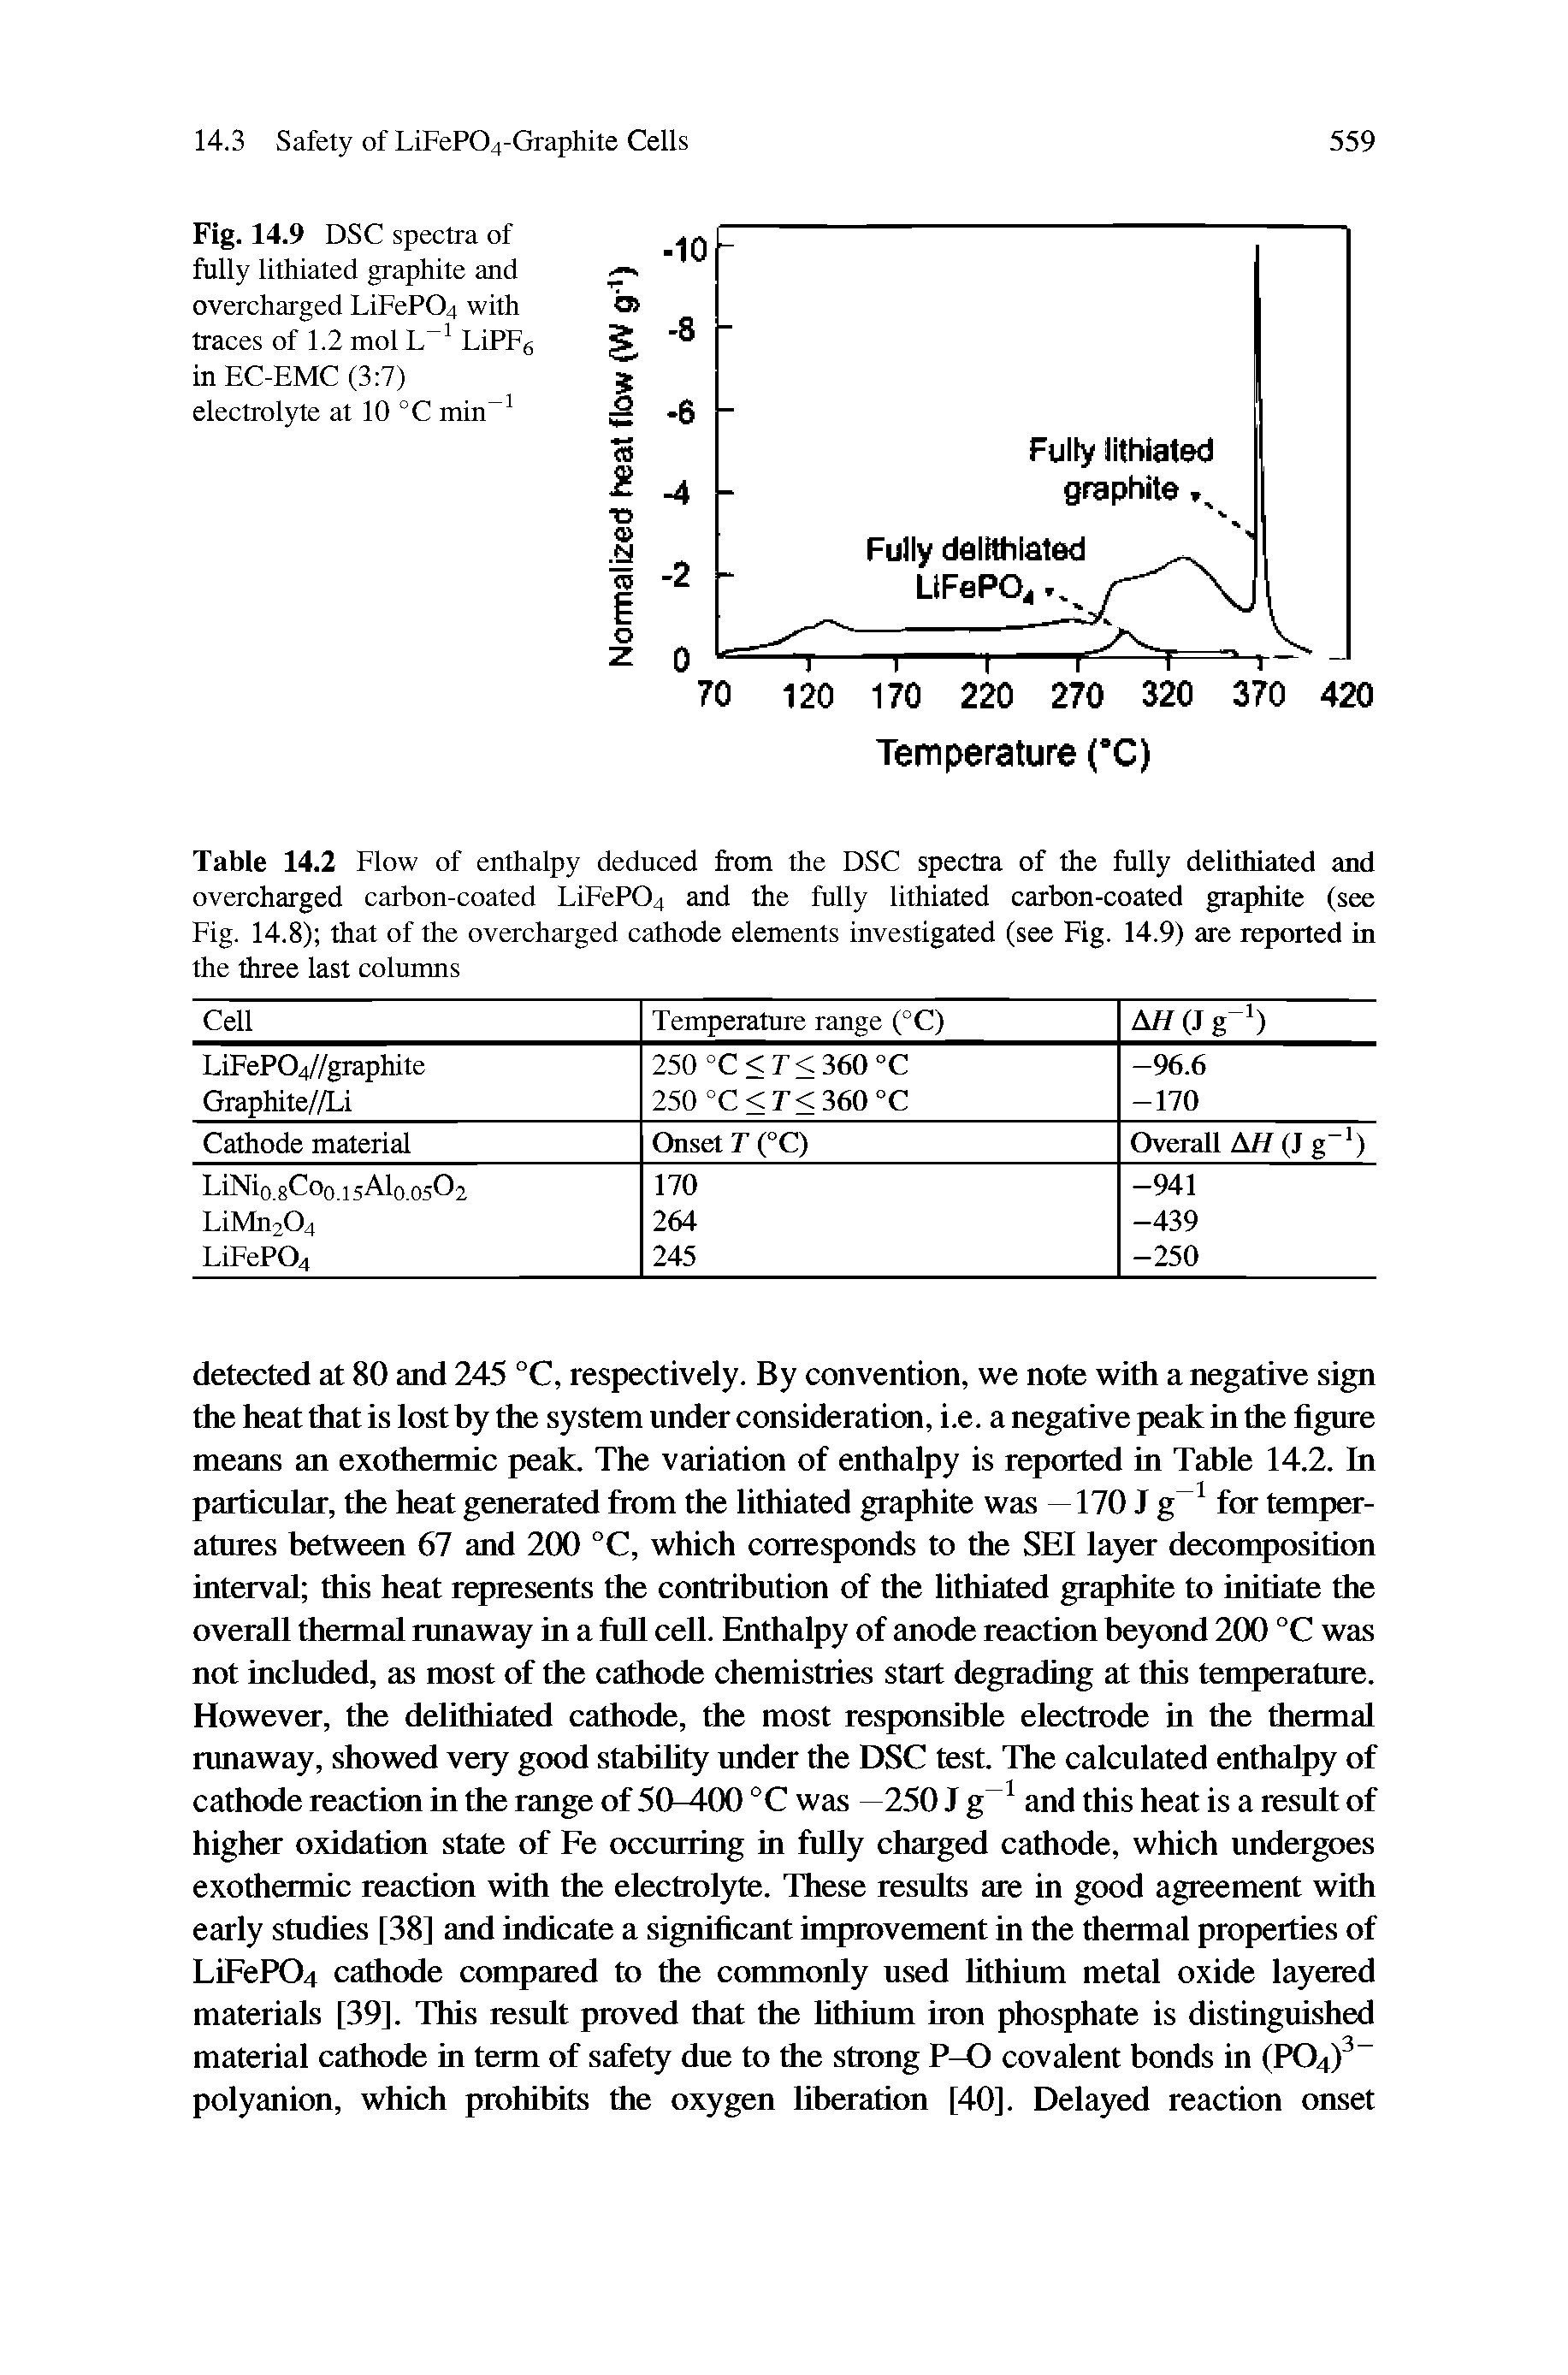 Table 14.2 Elow of enthalpy deduced from the DSC spectra of the fully delithiated and overcharged carbon-coated LiFeP04 and the fully lithiated carbon-coated graphite (see Eig. 14.8) that of the overcharged cathode elements investigated (see Fig. 14.9) are reported in the three last columns...